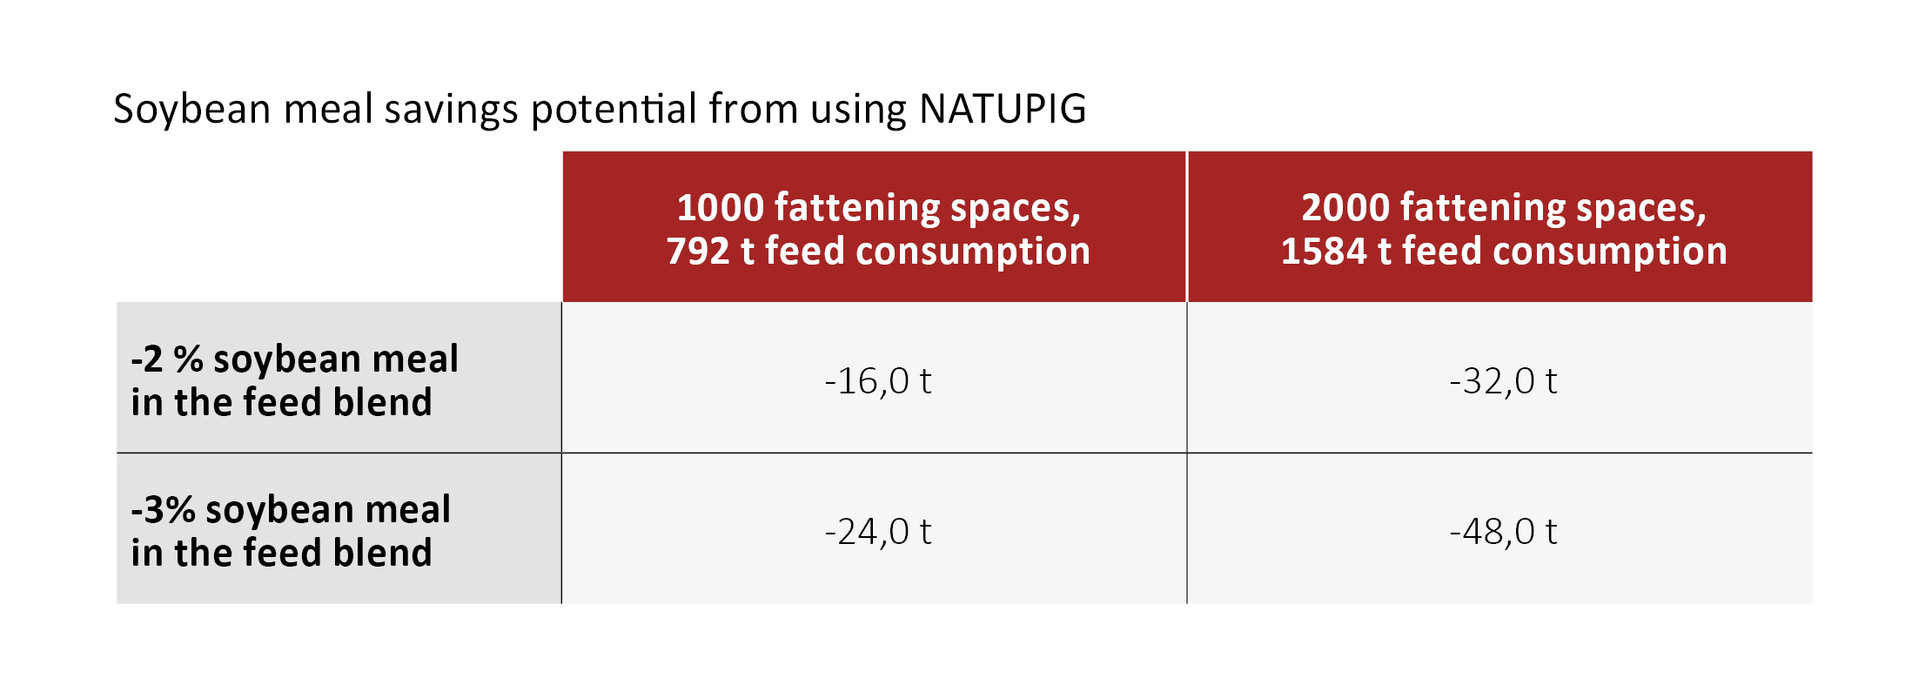 Soybean meal savings potential from using NATUPIG